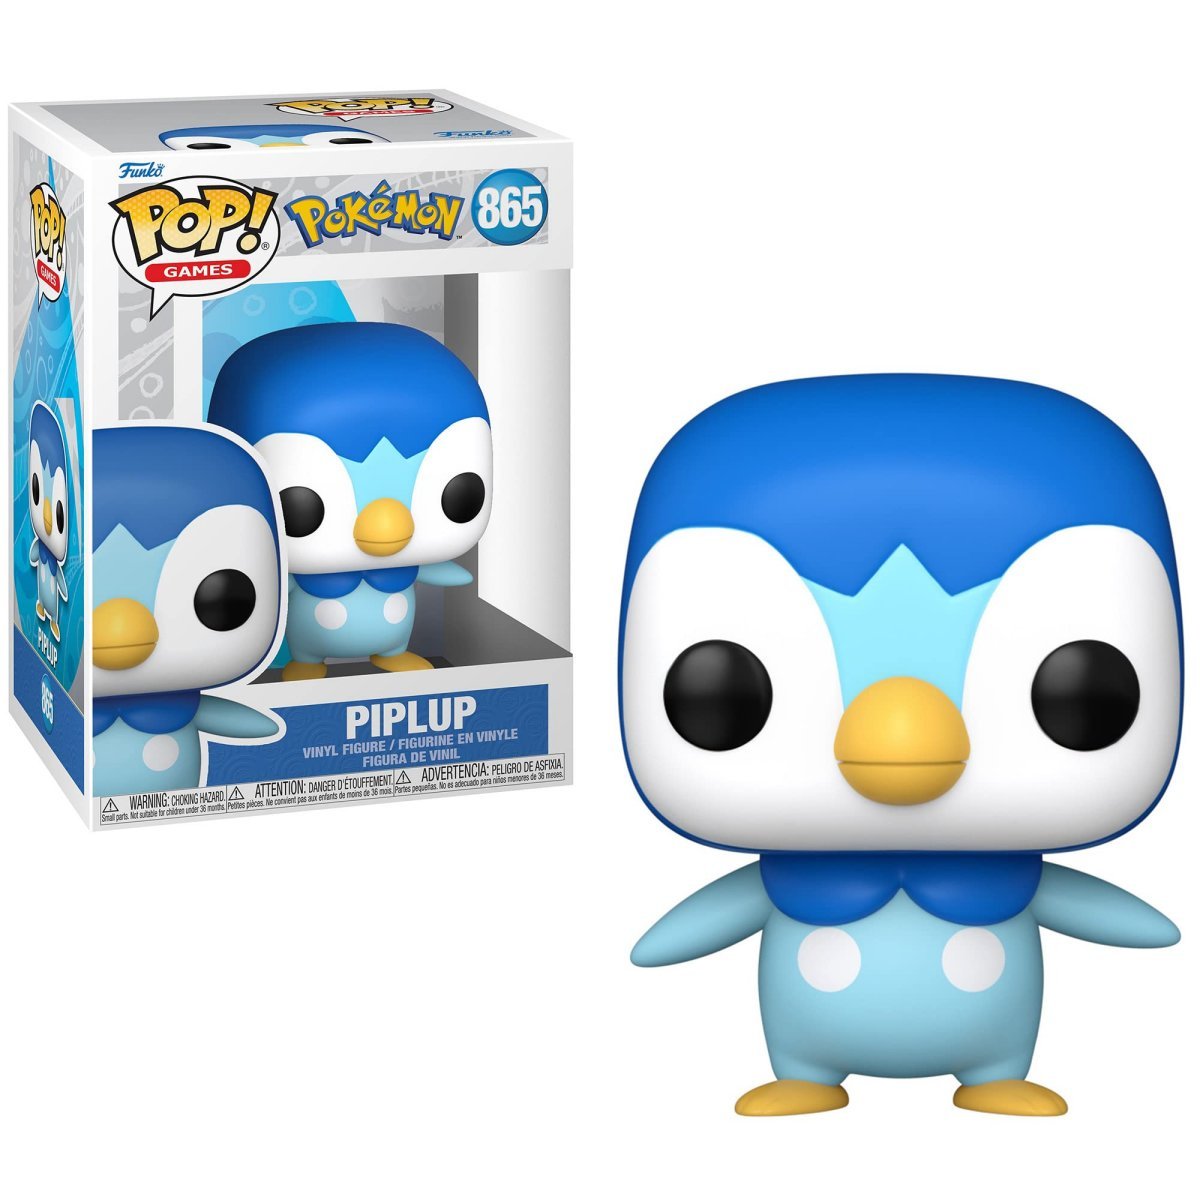 Piplup Funko Pop displayed in box and out of box